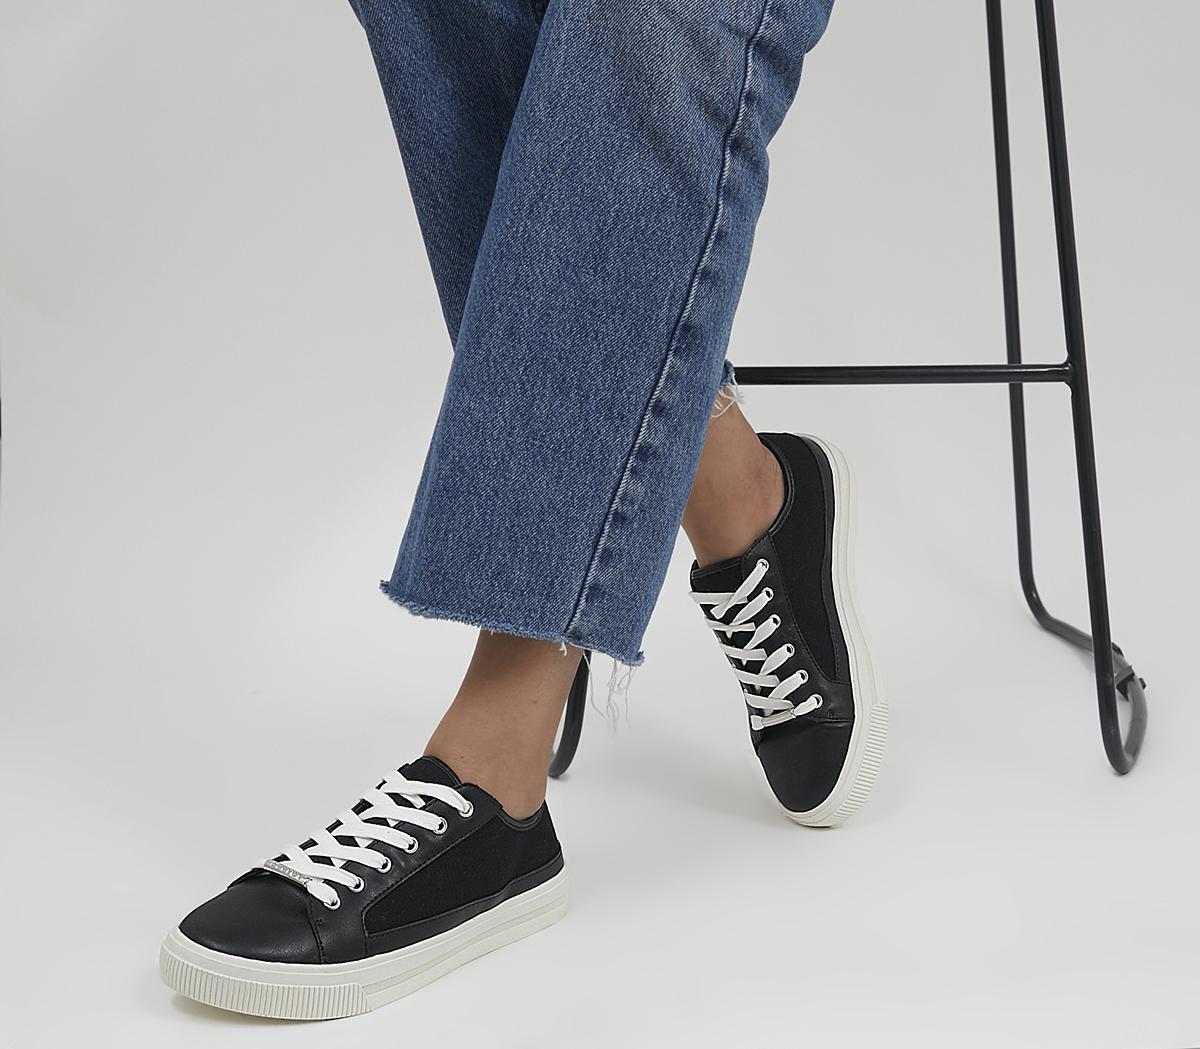 OfficeFinest Canvas Lace Up Trainers	Black Canvas Mix